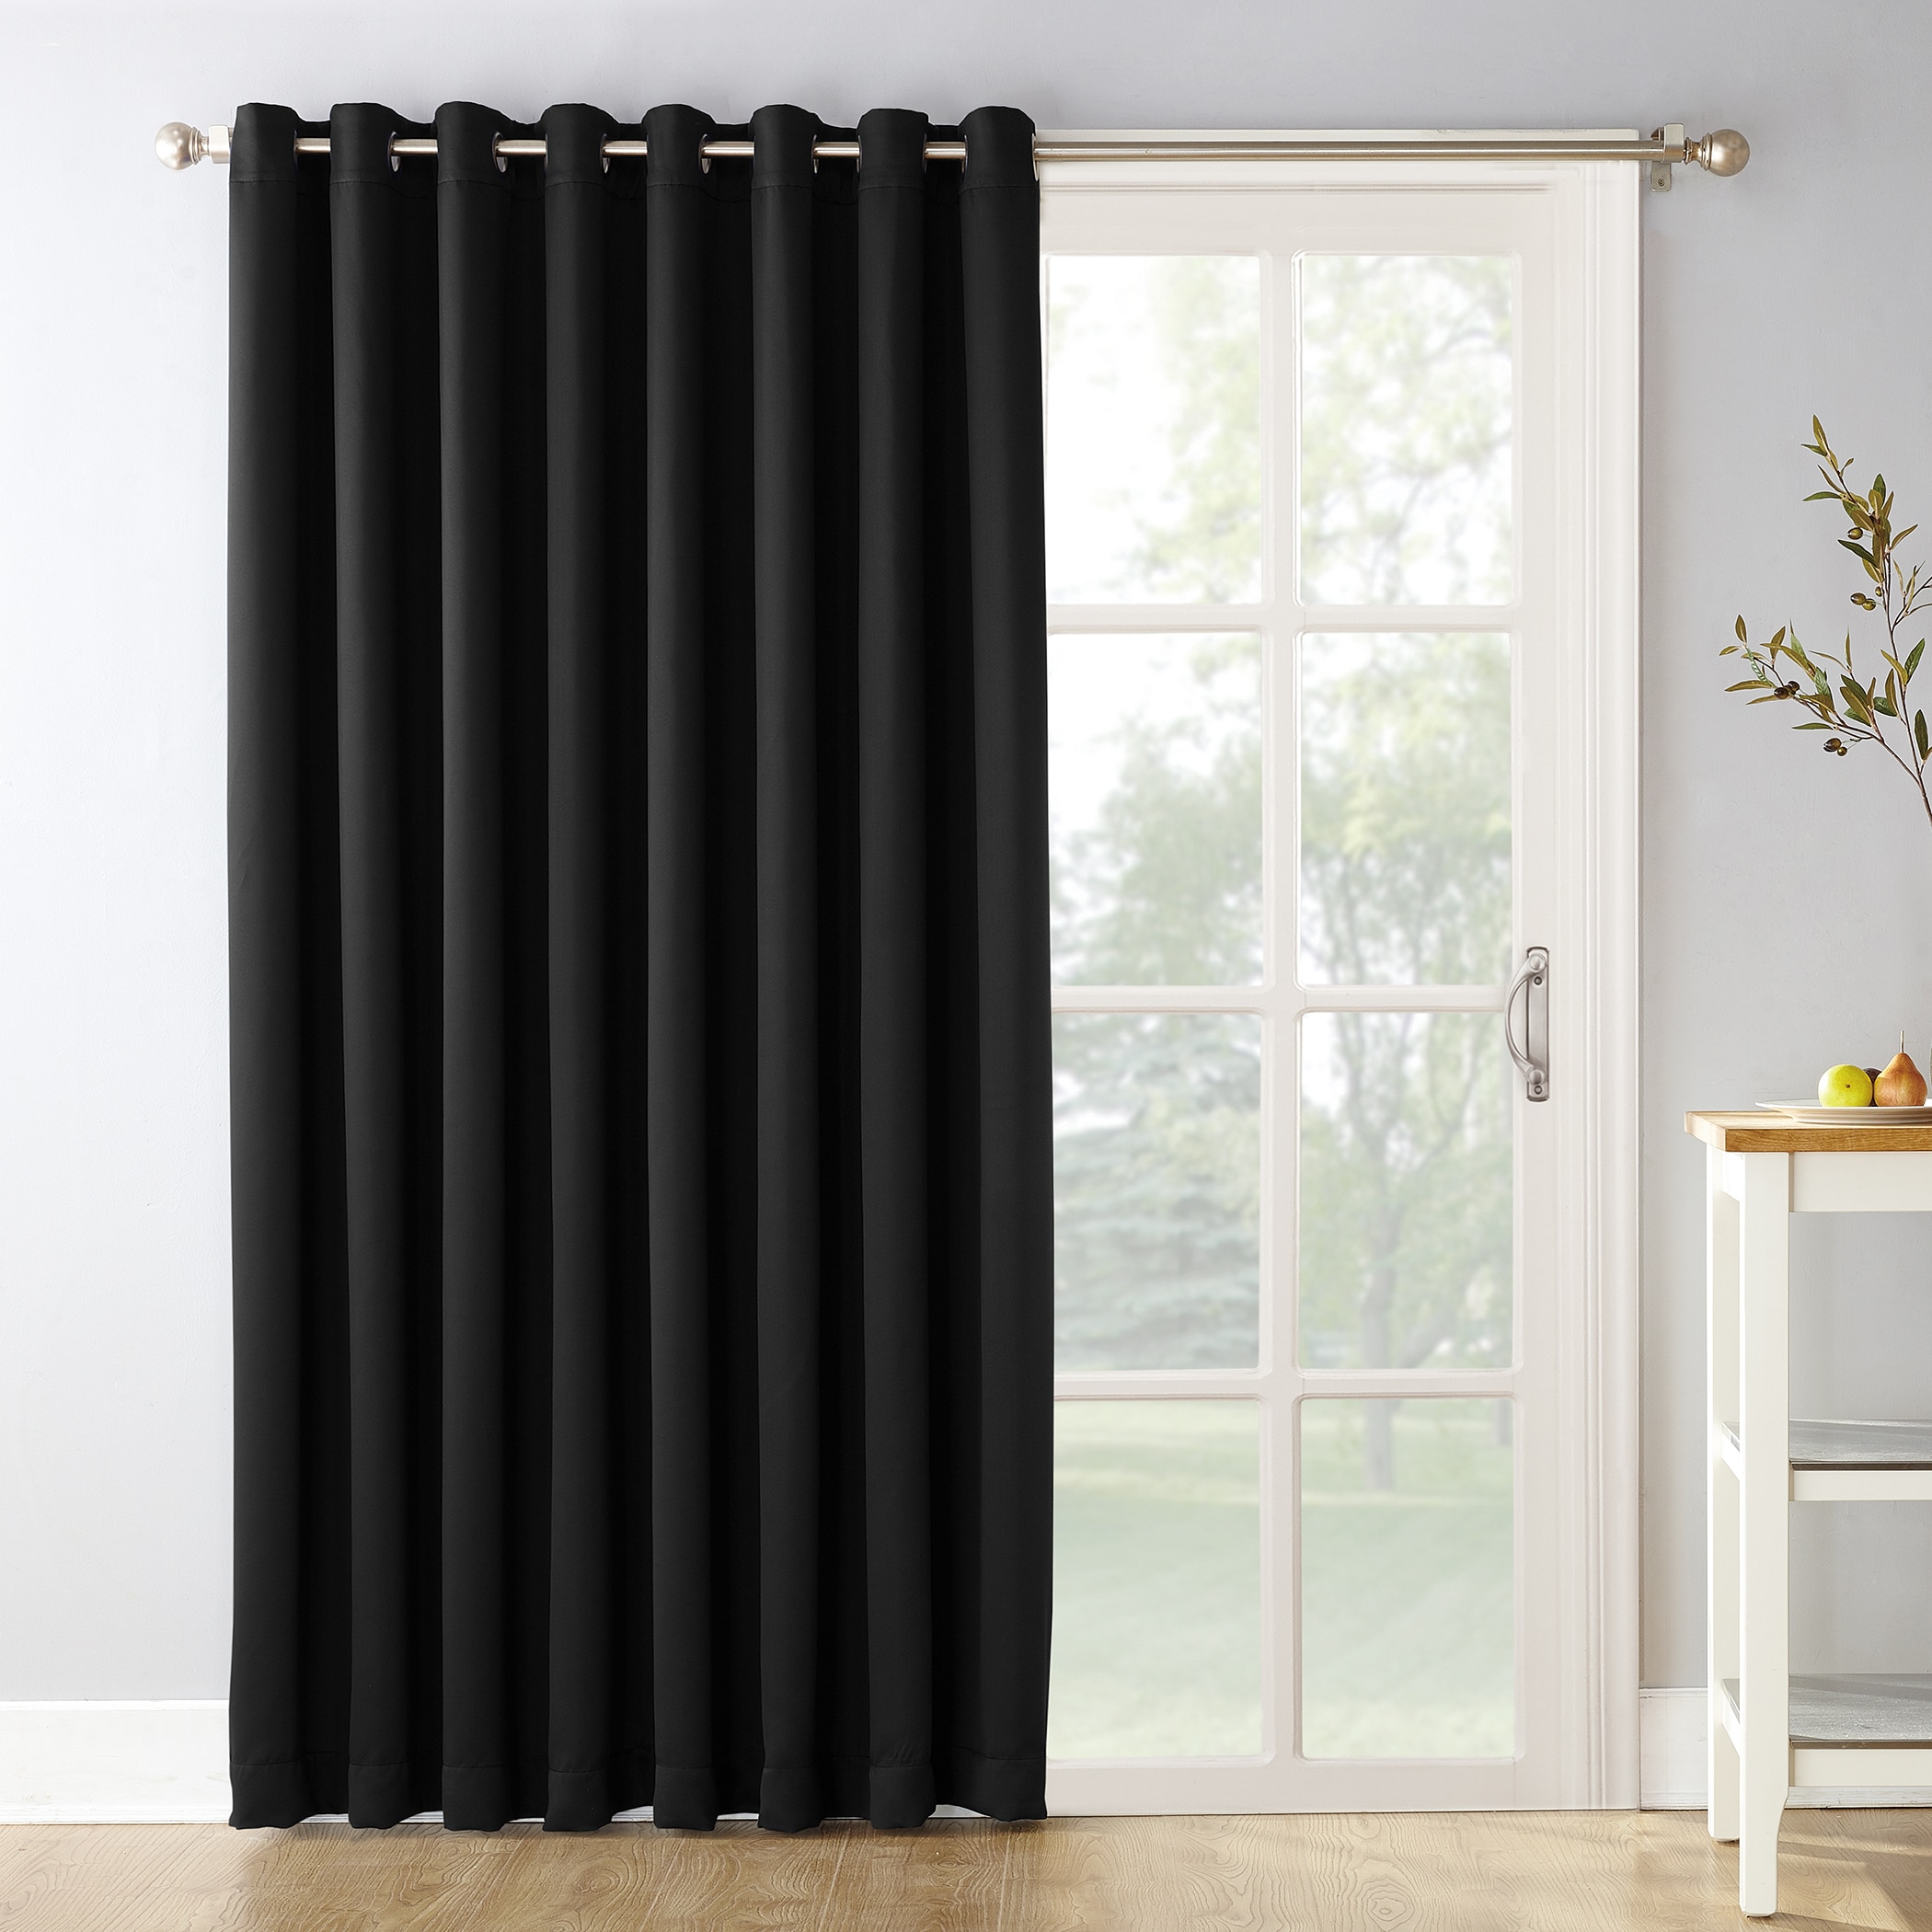 Sun Zero 84 In Black Blackout Interlined Grommet Single Curtain Panel The Curtains Ds Department At Lowes Com